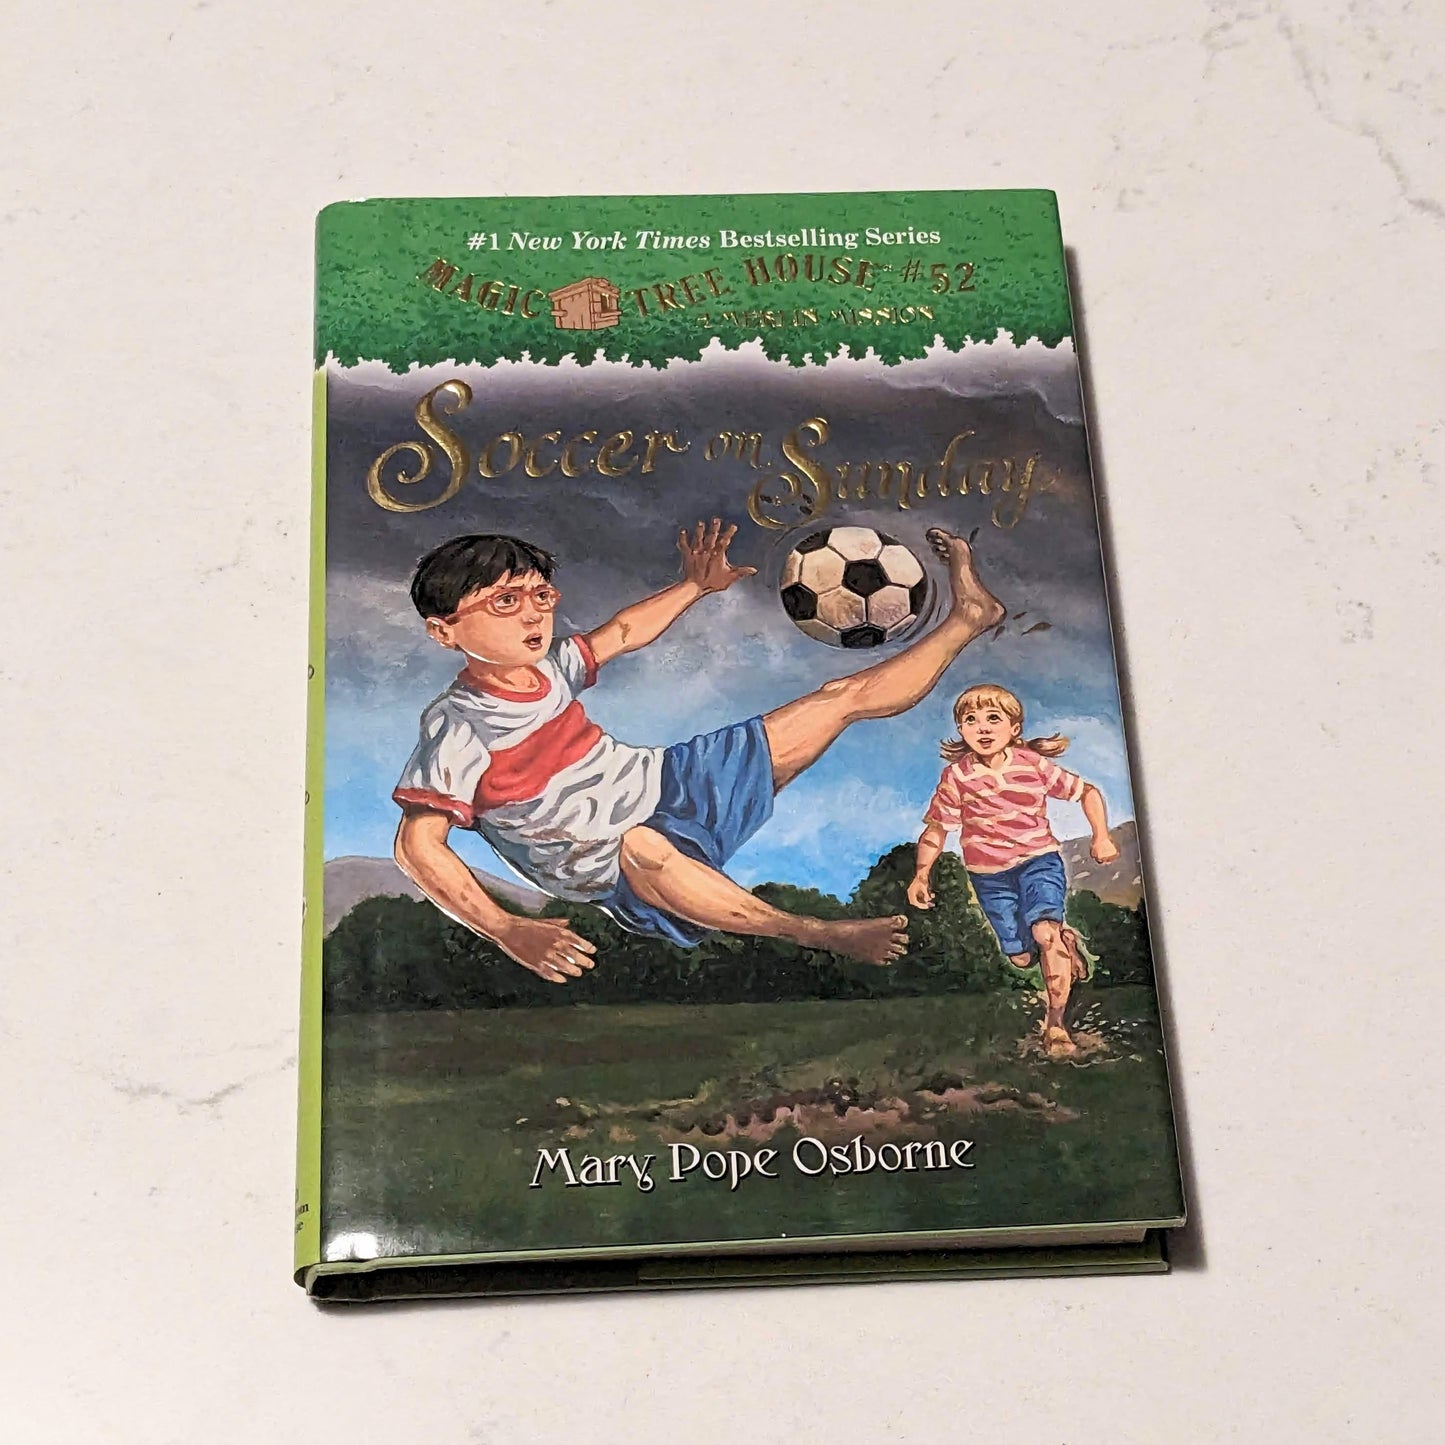 Soccer on a Sunday (Magic Treehouse #52, Merlin Mission) by Mary Pope Osbourne